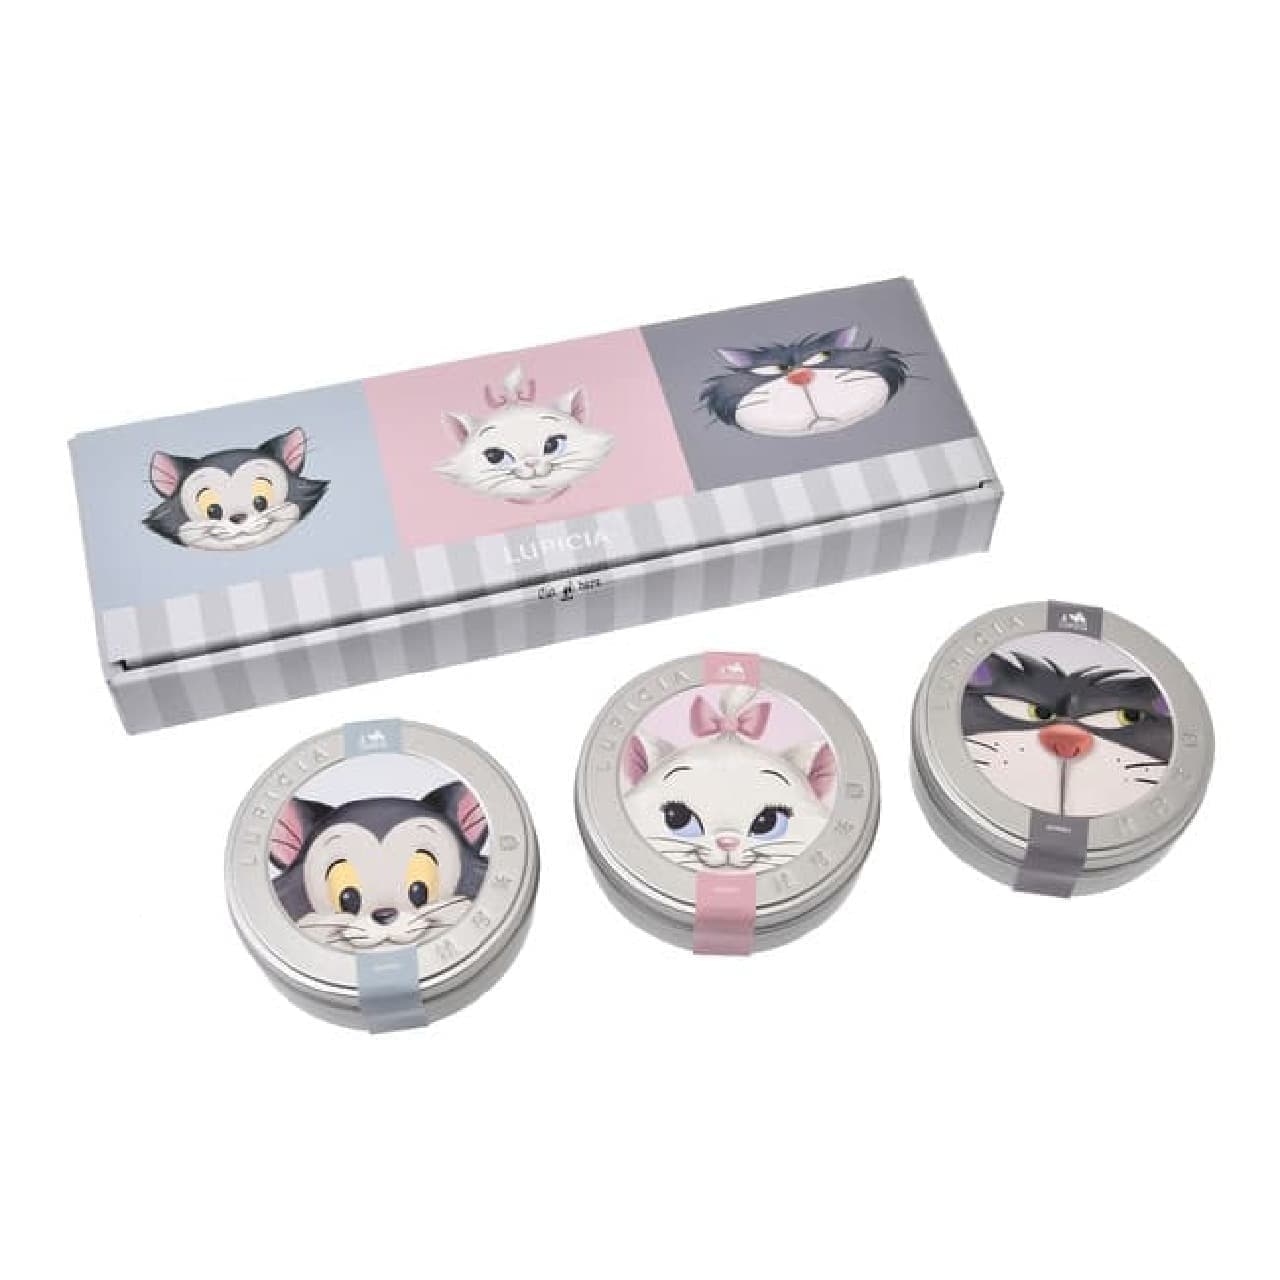 Disney Store "Cat's Day" Items -- Marie, Figaro, and Lucifer in Pretty Dull Pastel Colors